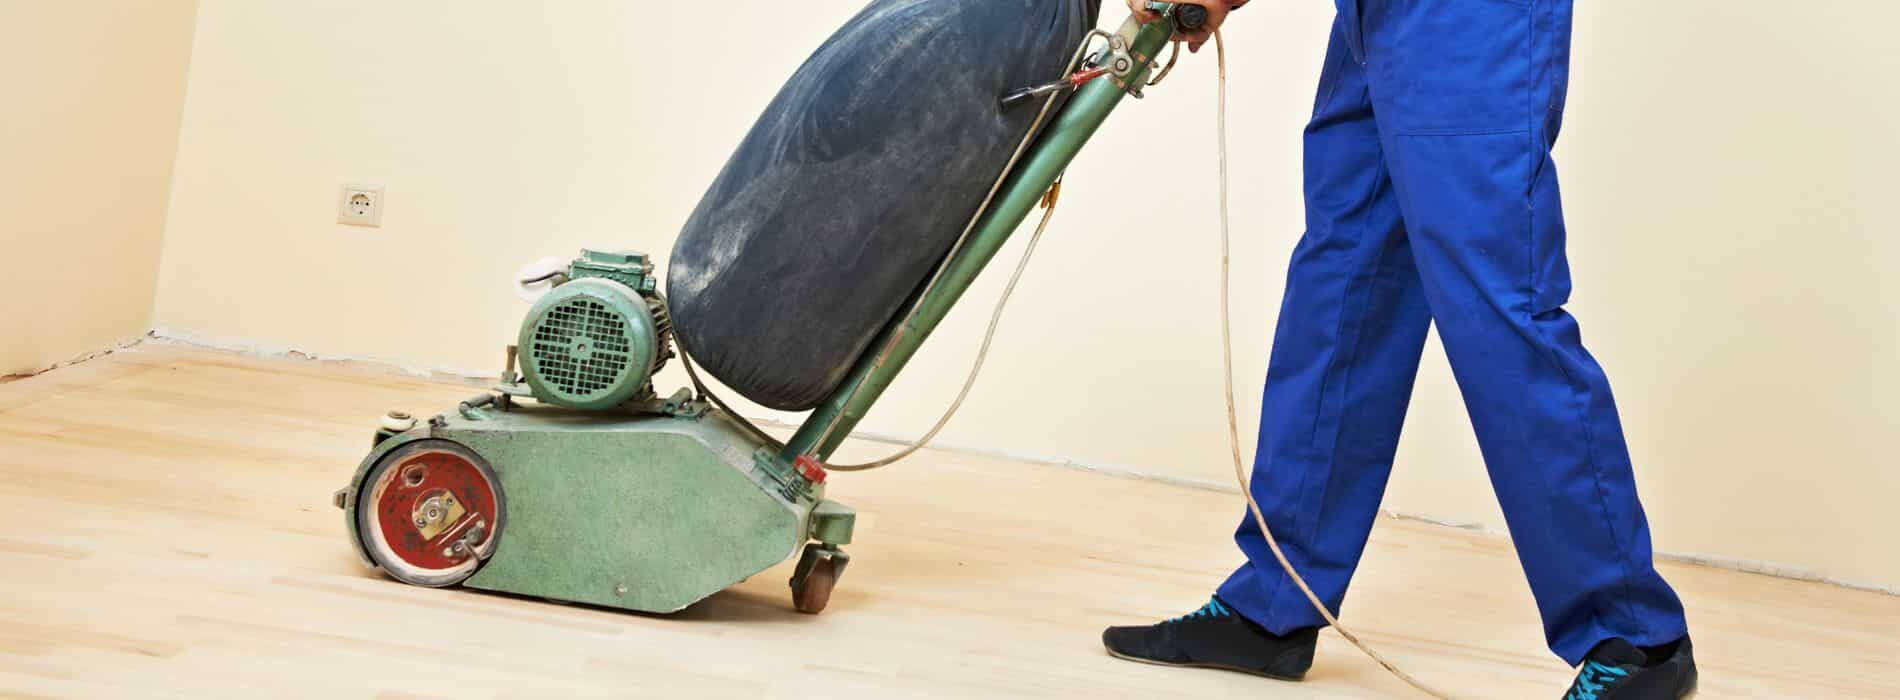 Mr Sander® uses a Bona Belt, a strong 2.2 kW belt sander coupled to a dust extraction system with a HEPA filter, in Belgravia, SW1. The sander operates at 230V and 50/60 Hz. This configuration offers clean and efficient results when sanding a herringbone floor.